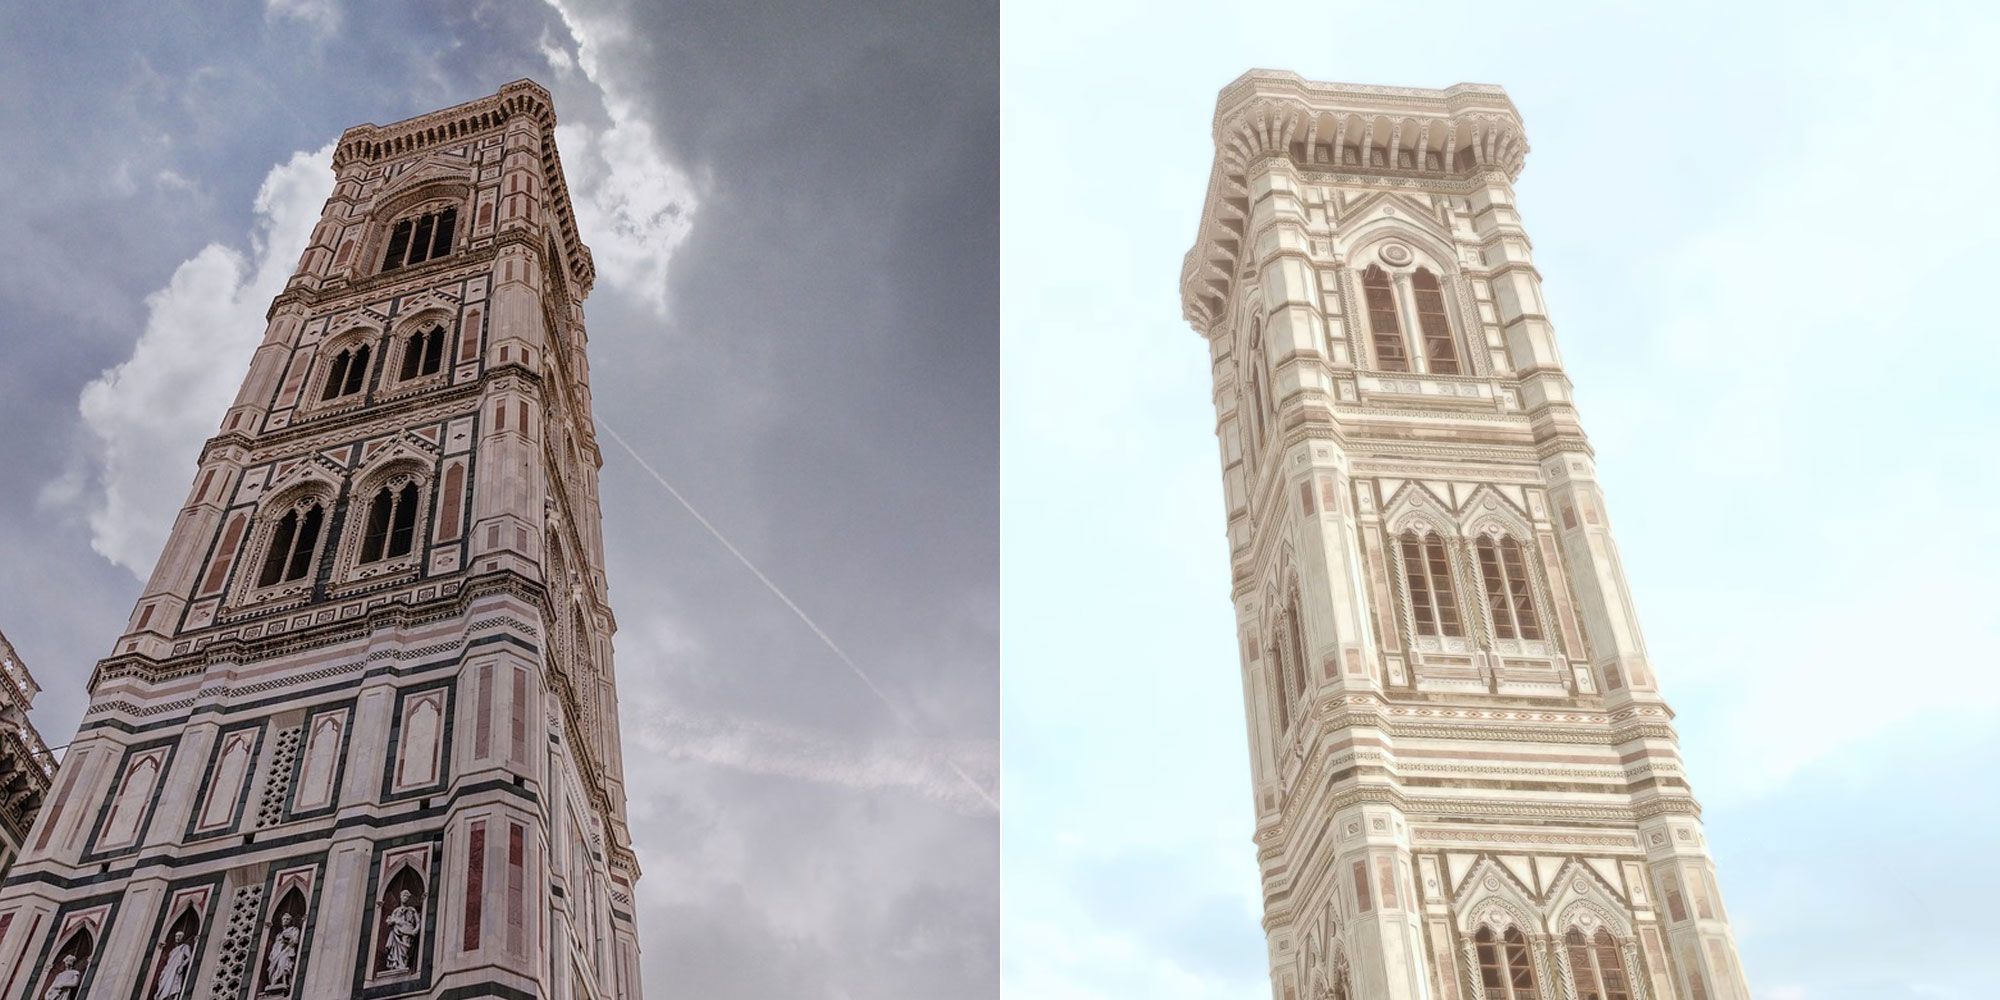 Giotto's Bell Tower Assassin's Creed vs. real-life image. 